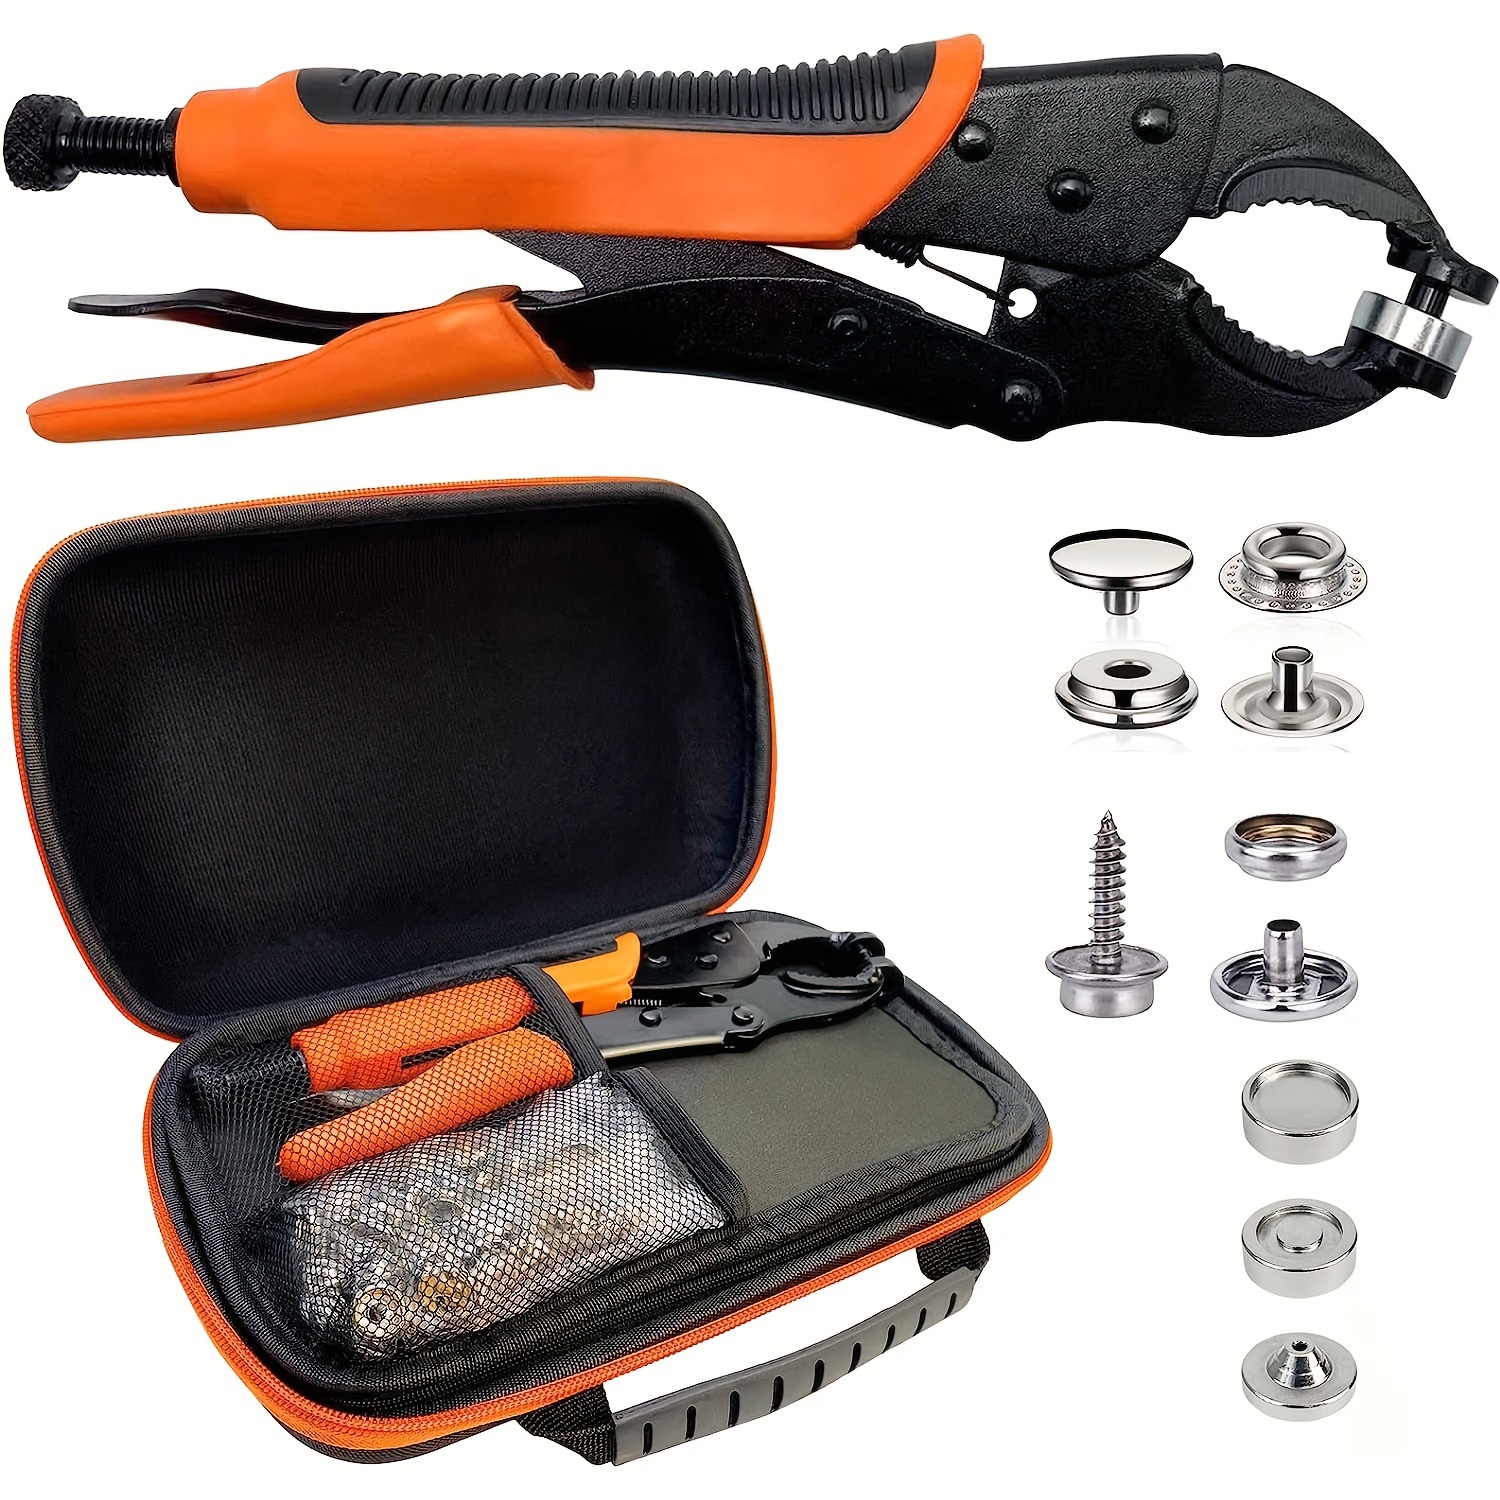 Screw Snaps Locking Pliers Kit, Couker Heavy-Duty T8 Snap Setter Tool for Fastening, Replacing Snaps, Repairing Boat Covers, Canvas, Tarps